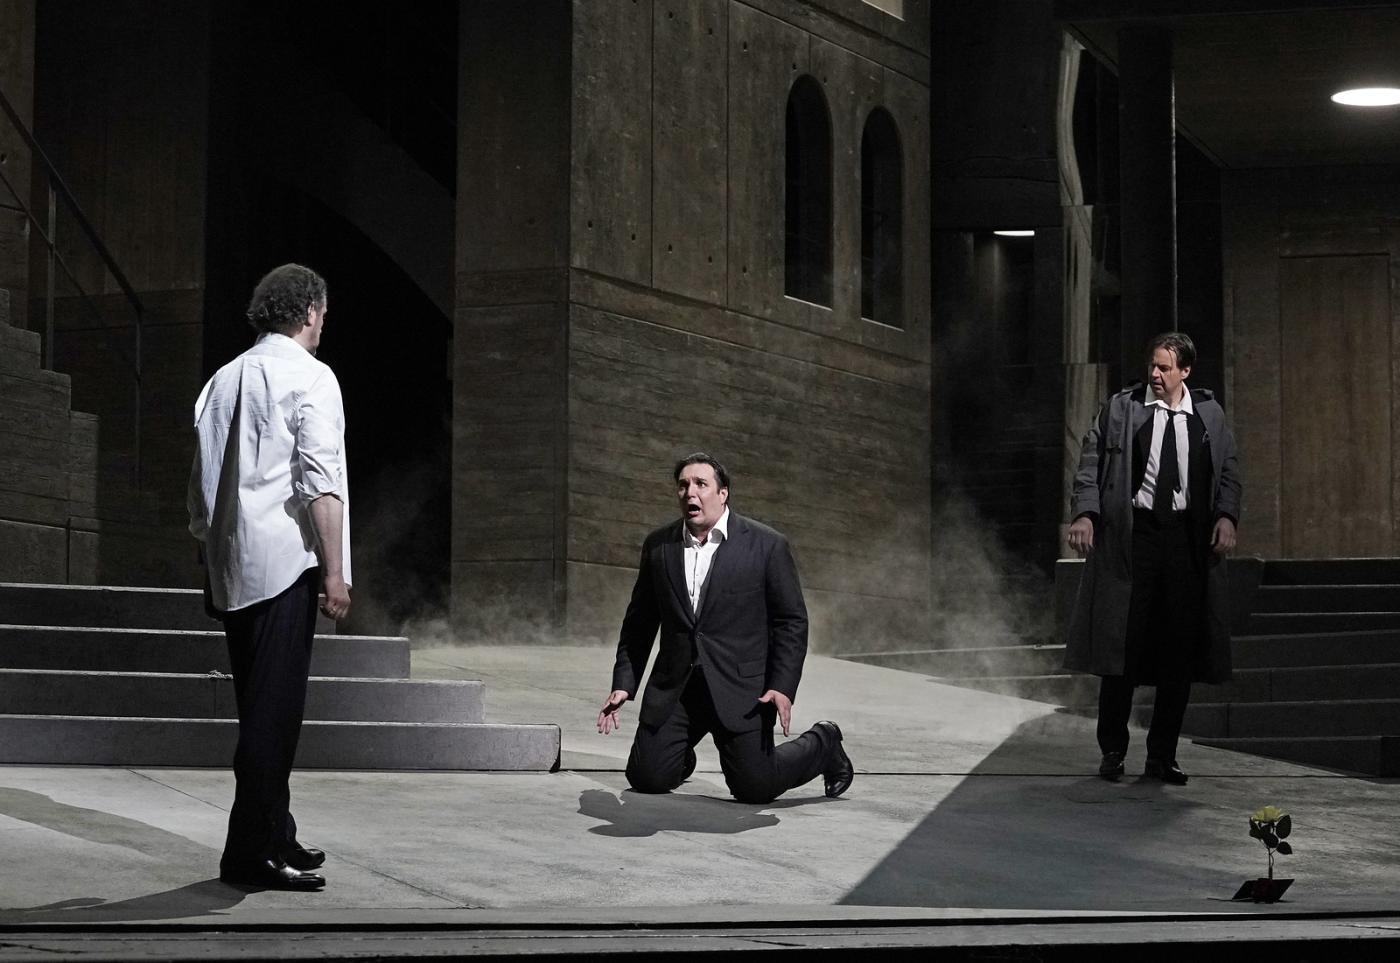 Alexander Tsymbalyuk (back to camera) as the Commendatore, Adam Plachetka as Leporello, and Peter Mattei in the title role of Mozart's "Don Giovanni." Photo: Karen Almond / Met Opera